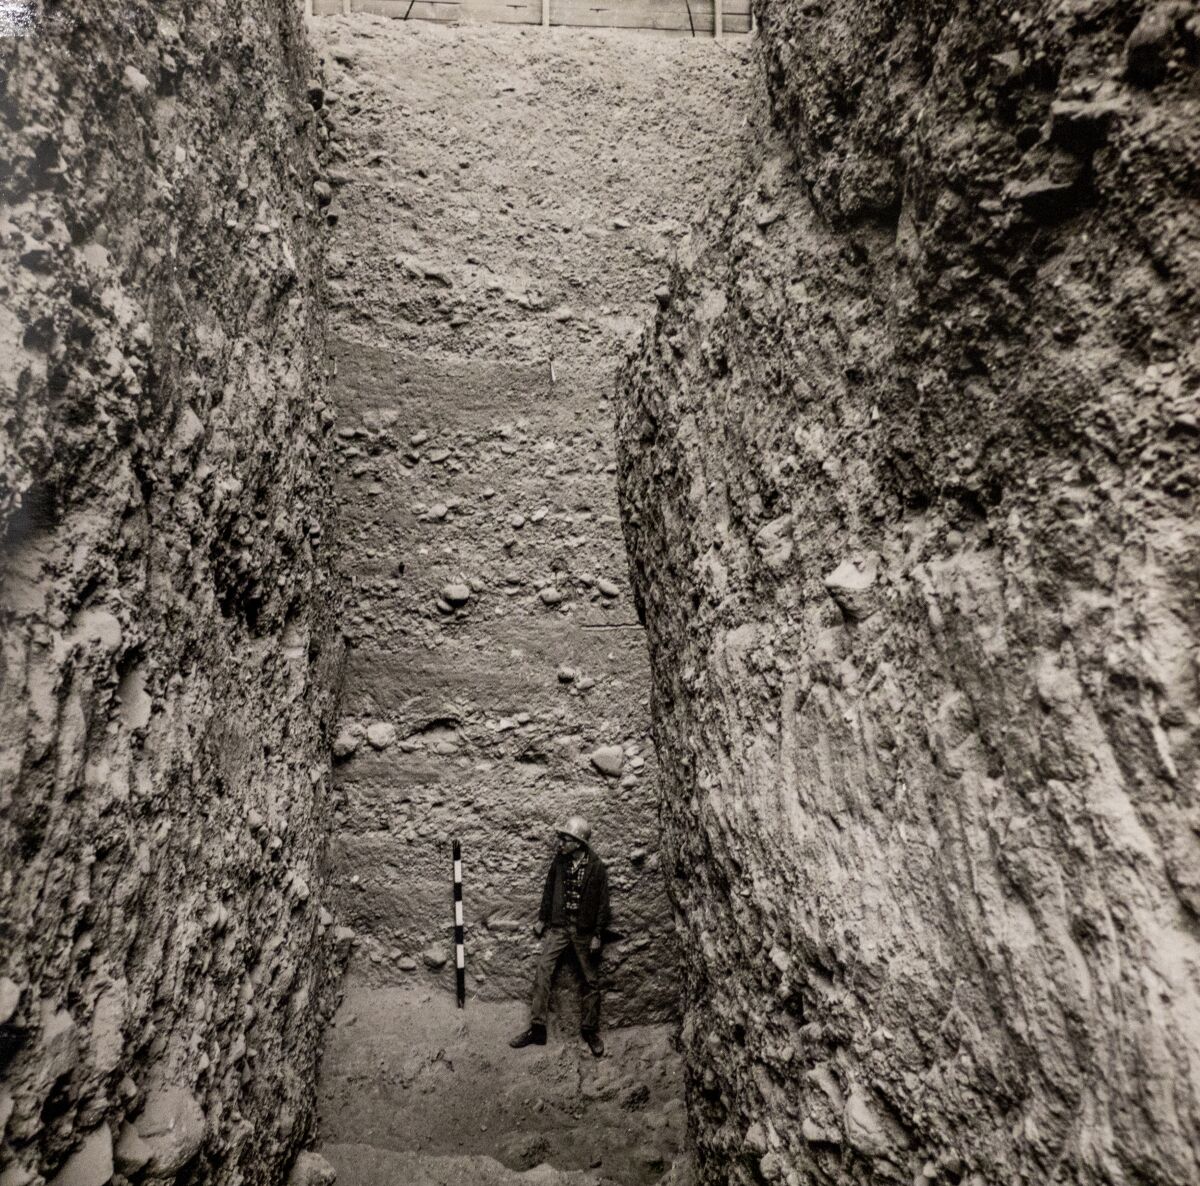 An old photo of a man standing in a deep, archaeological pit.